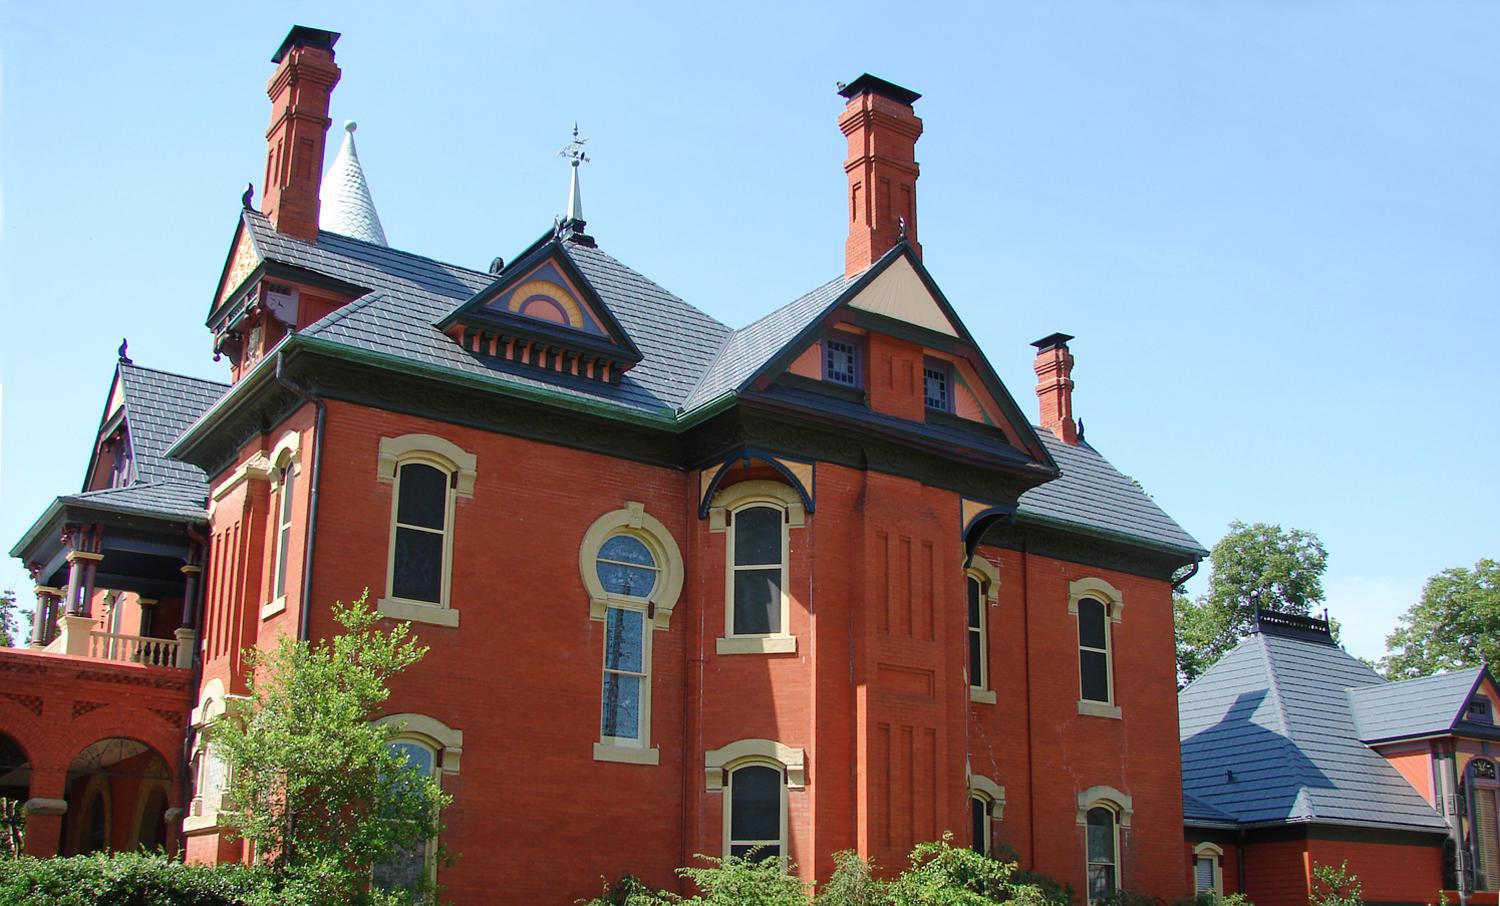 The historical look and charm of these buildings in a small community was preserved with EDCO's steel slate roofing.